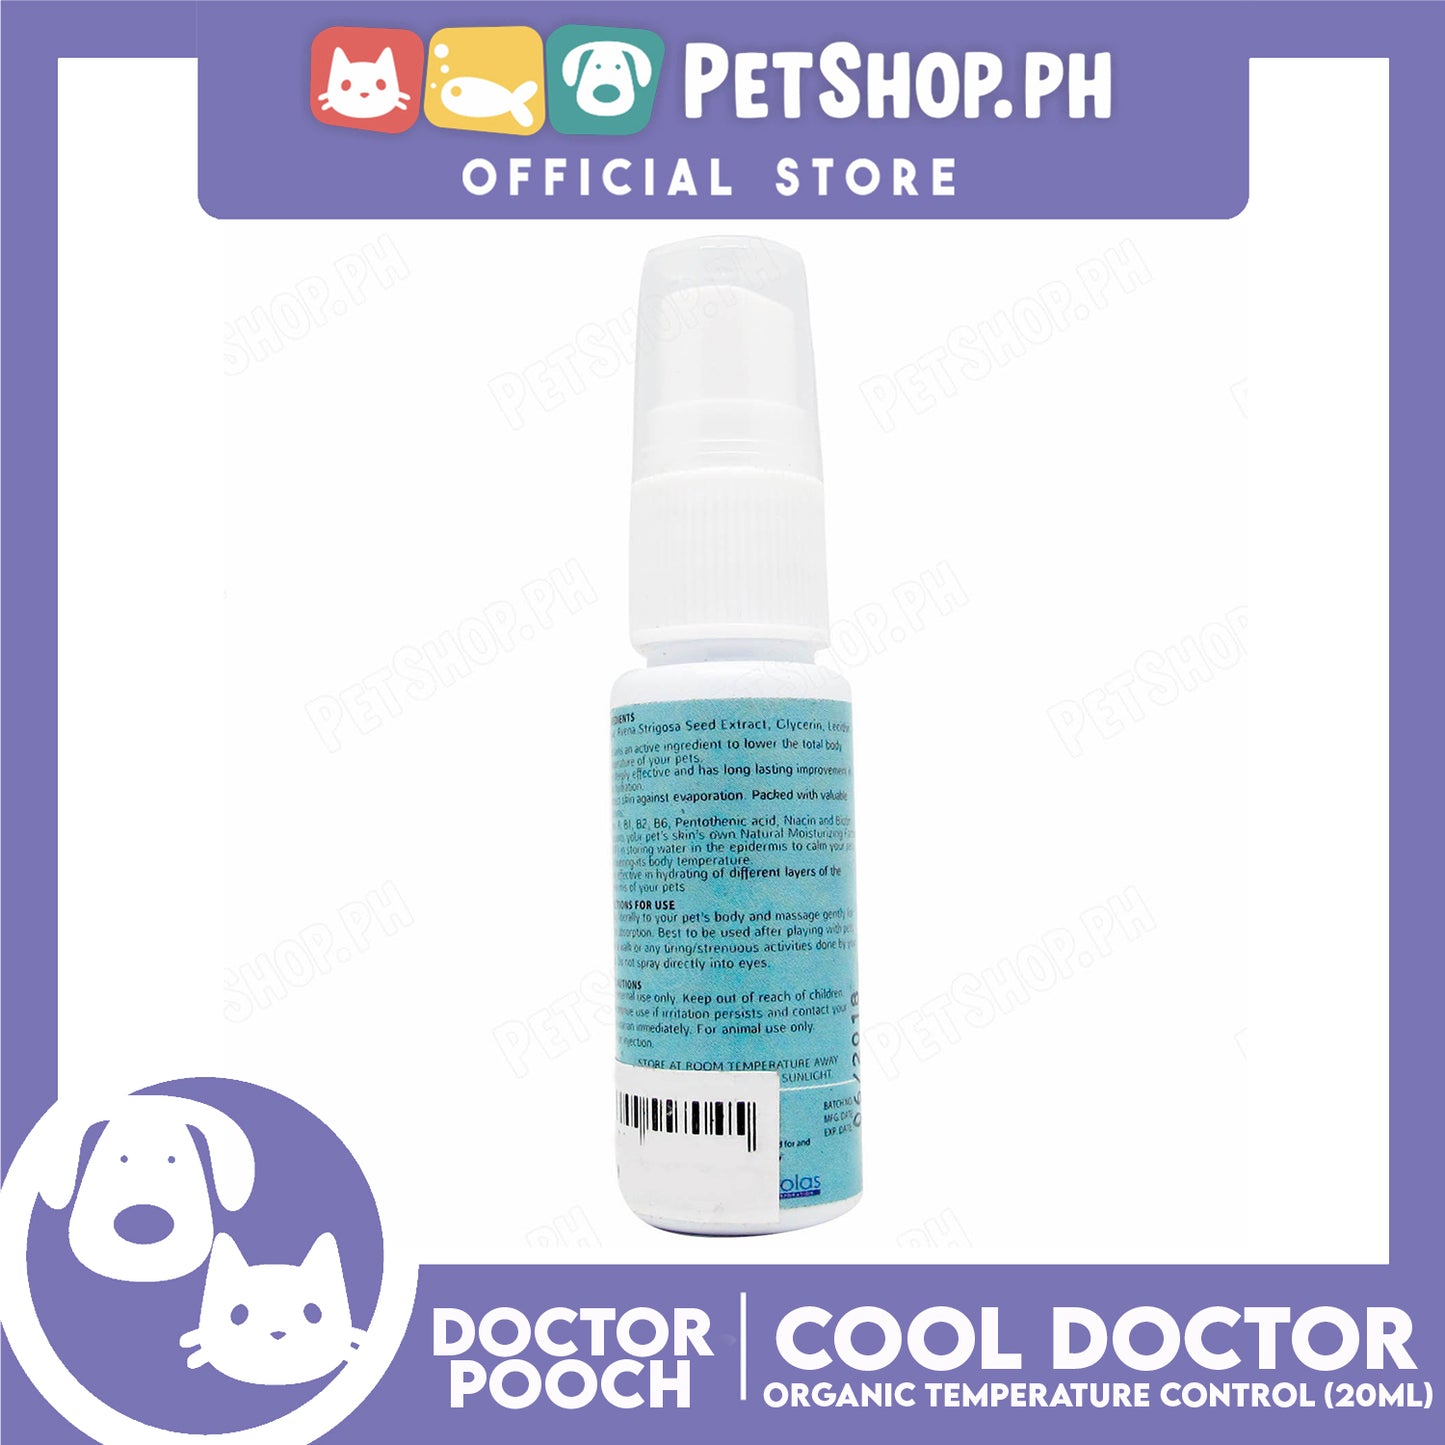 Play Pets Cool Doctor Organic Temperature Control 20ml For Dogs And Cats